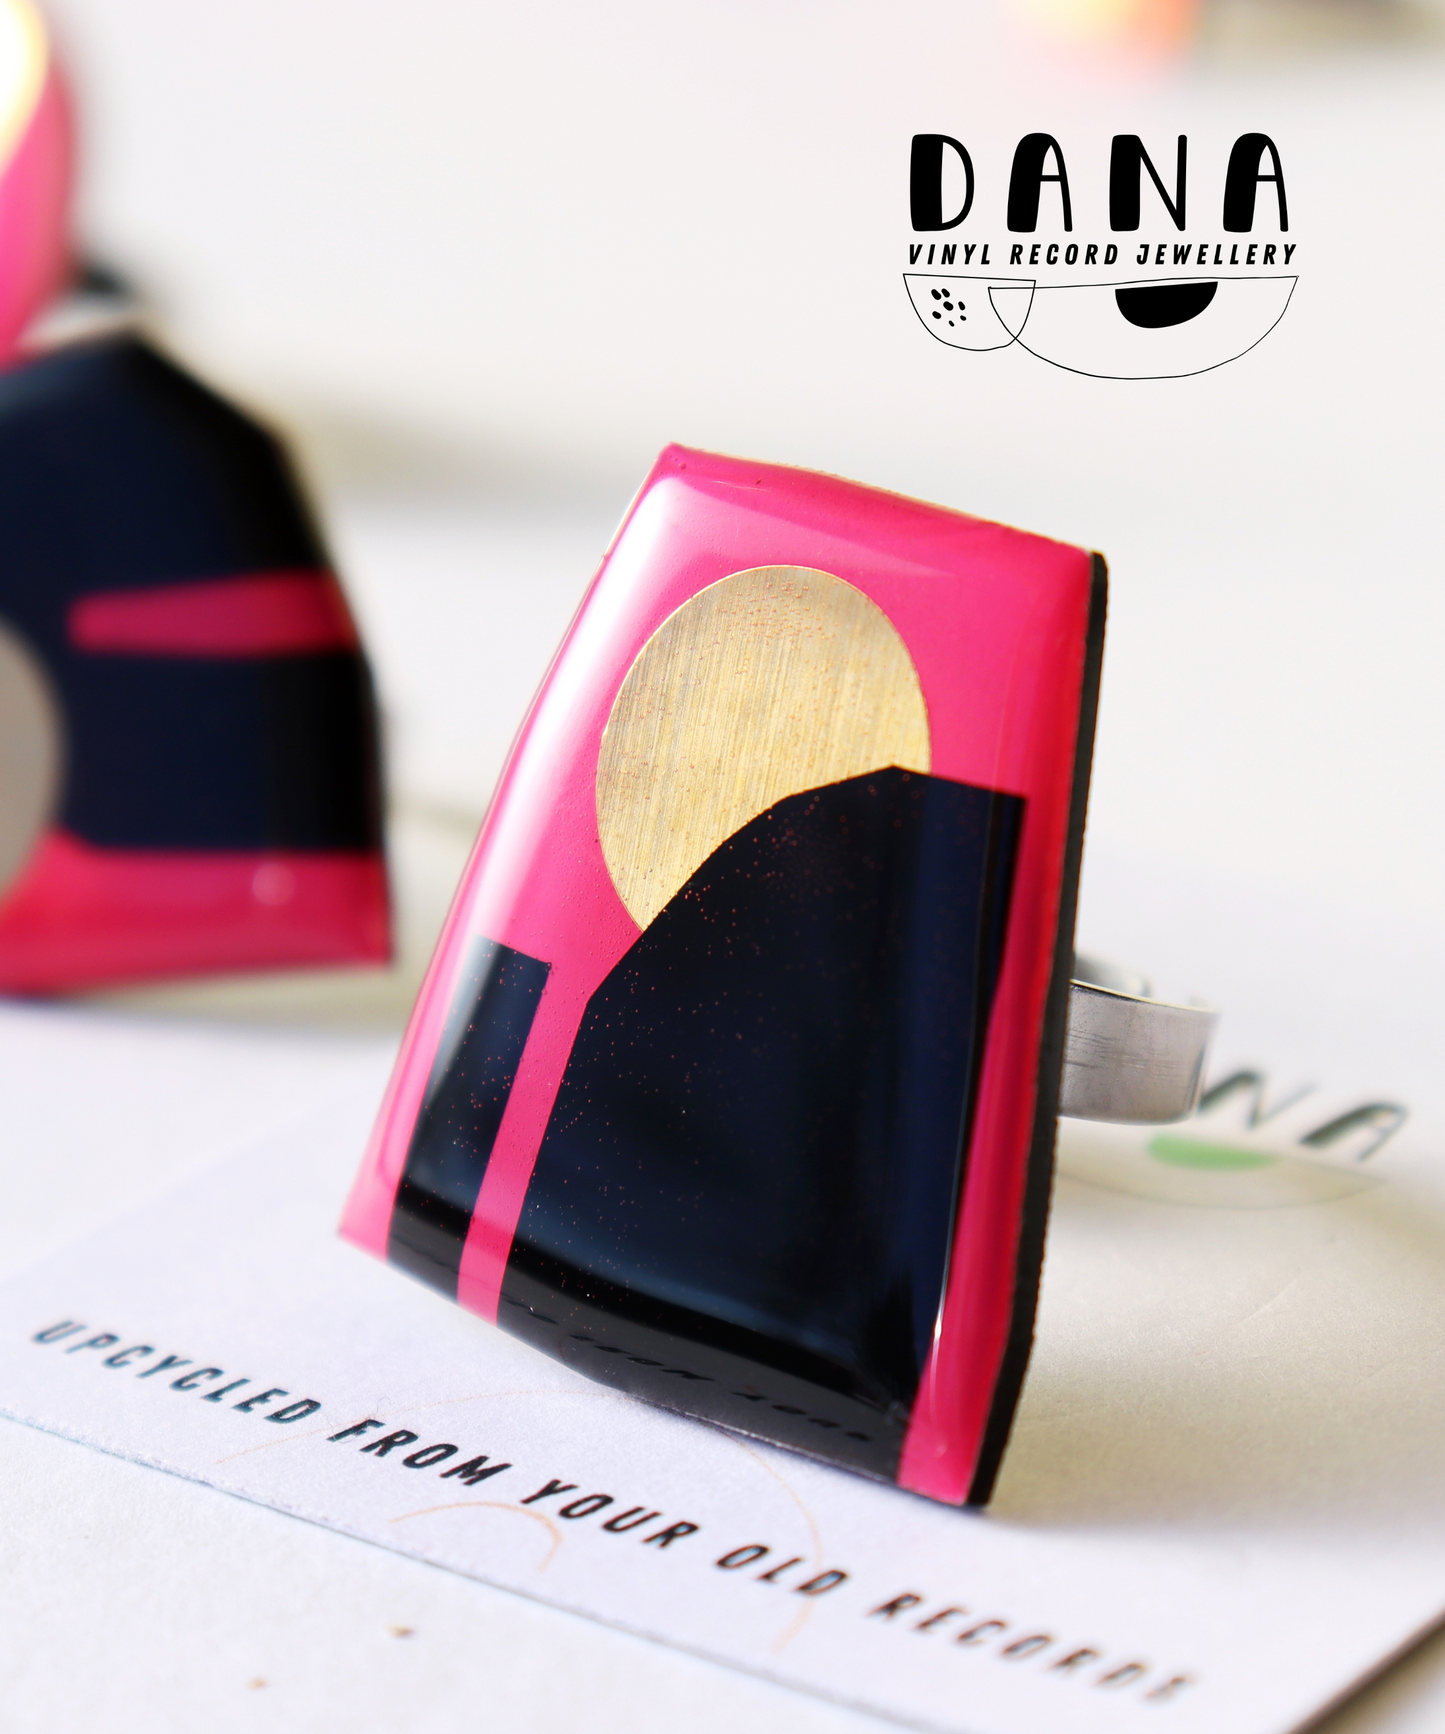 OOAK Pink black and gold abstract recycled vinyl record ring by DANA Jewellery